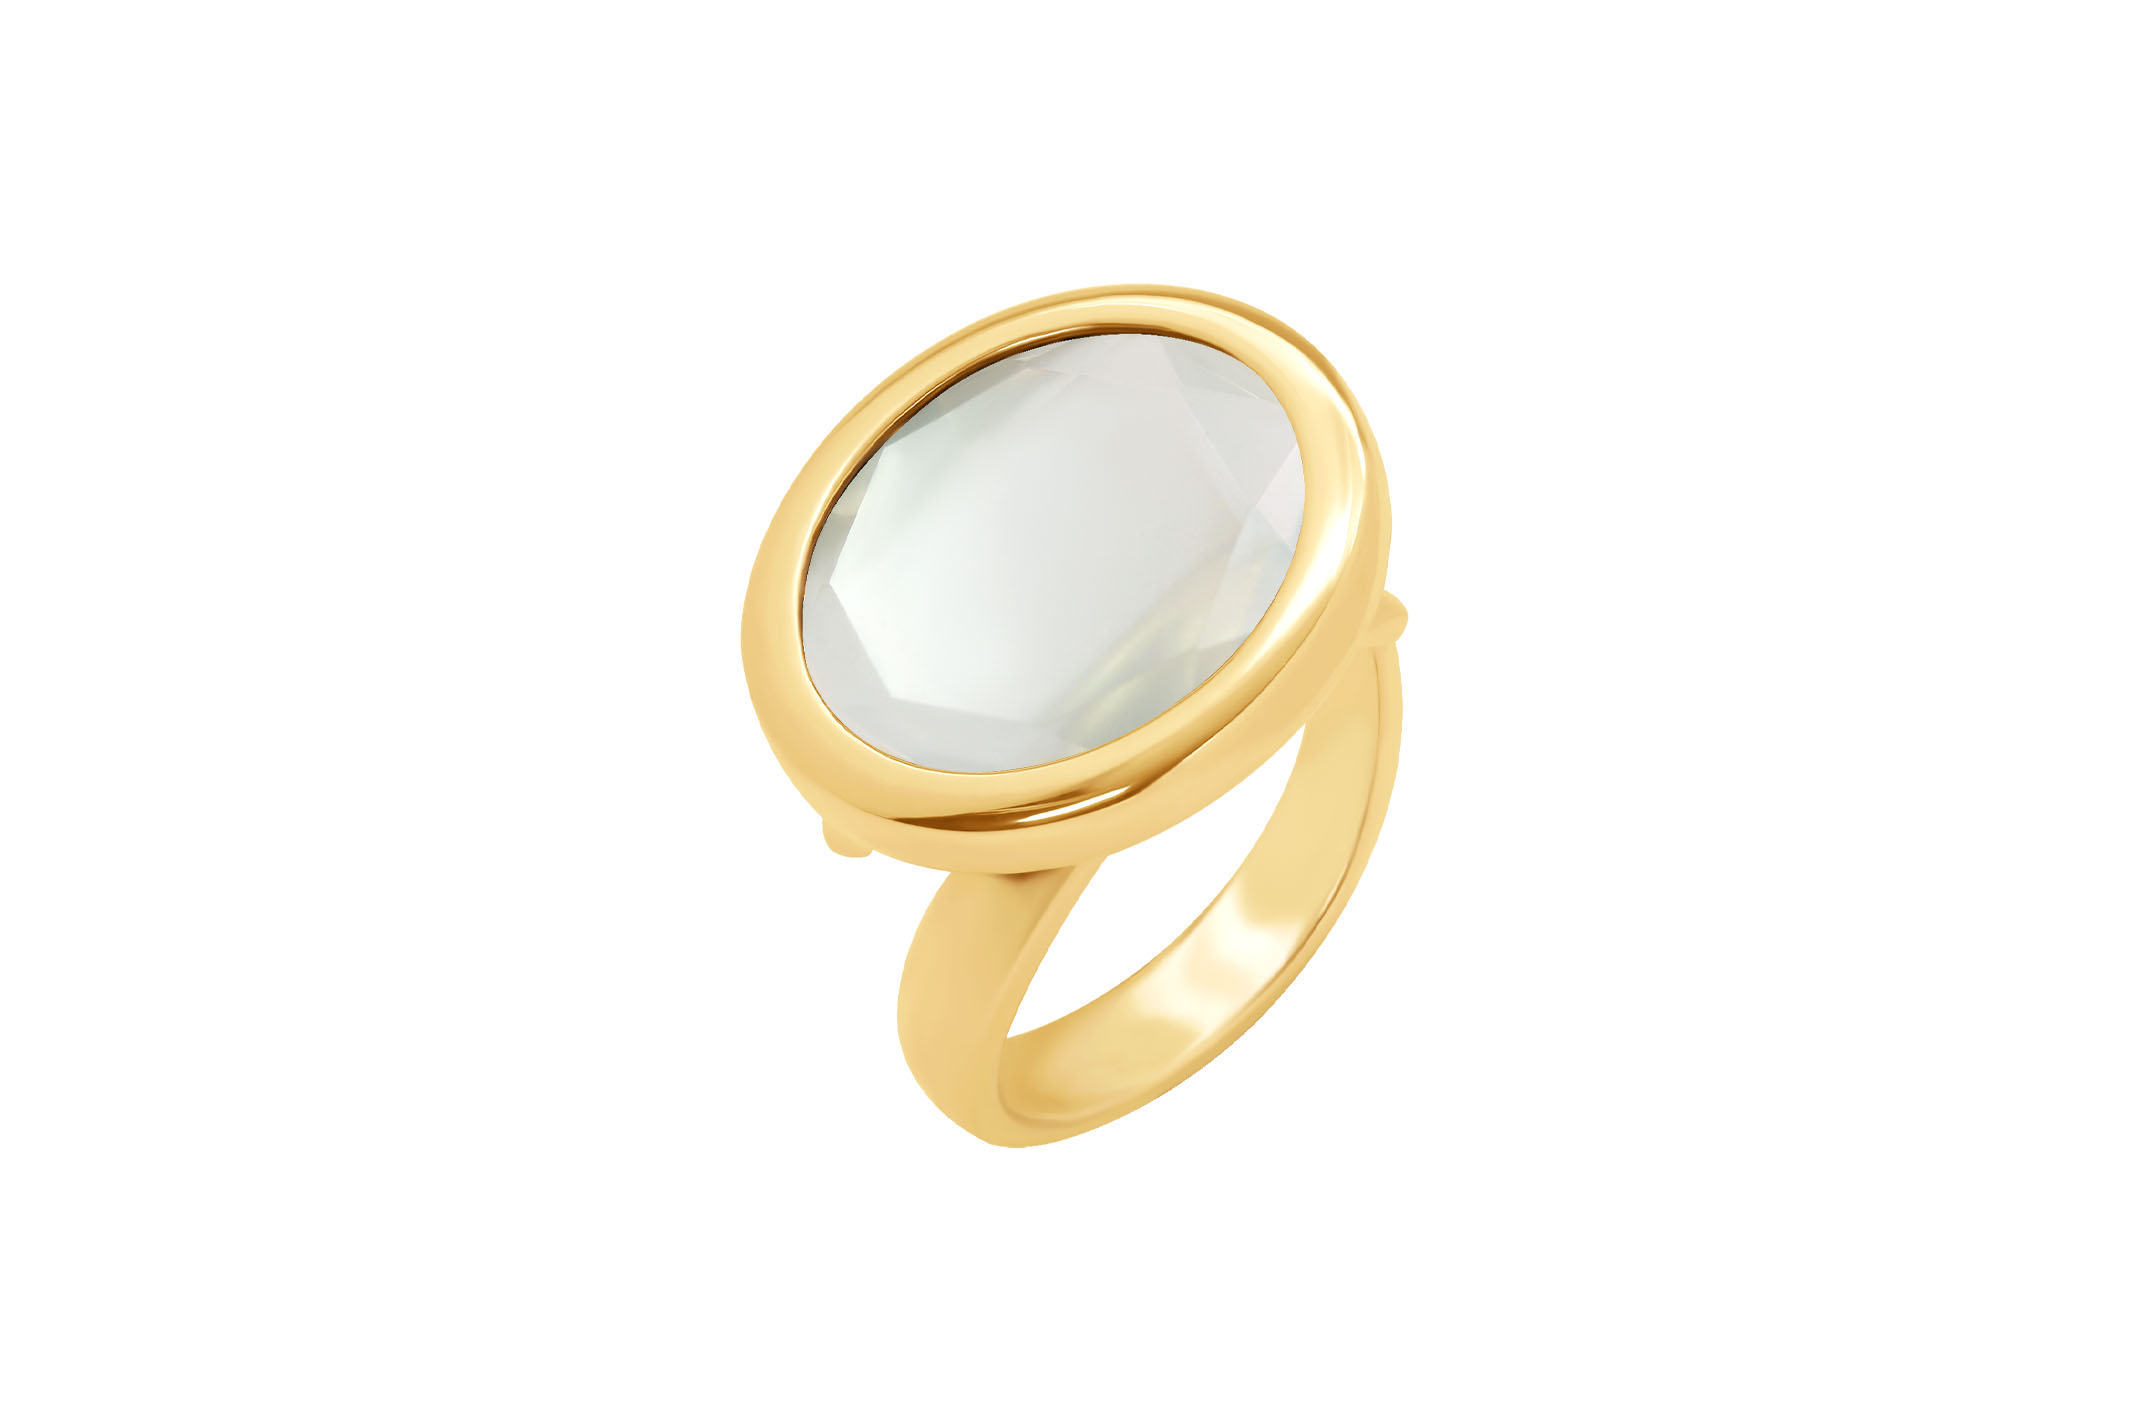 Jewel: ring;Material: 925 silver;Stone: zirconia;Weight: 4.3 gr;Face Size: 1.7 cm;Color: yellow;Gender: woman